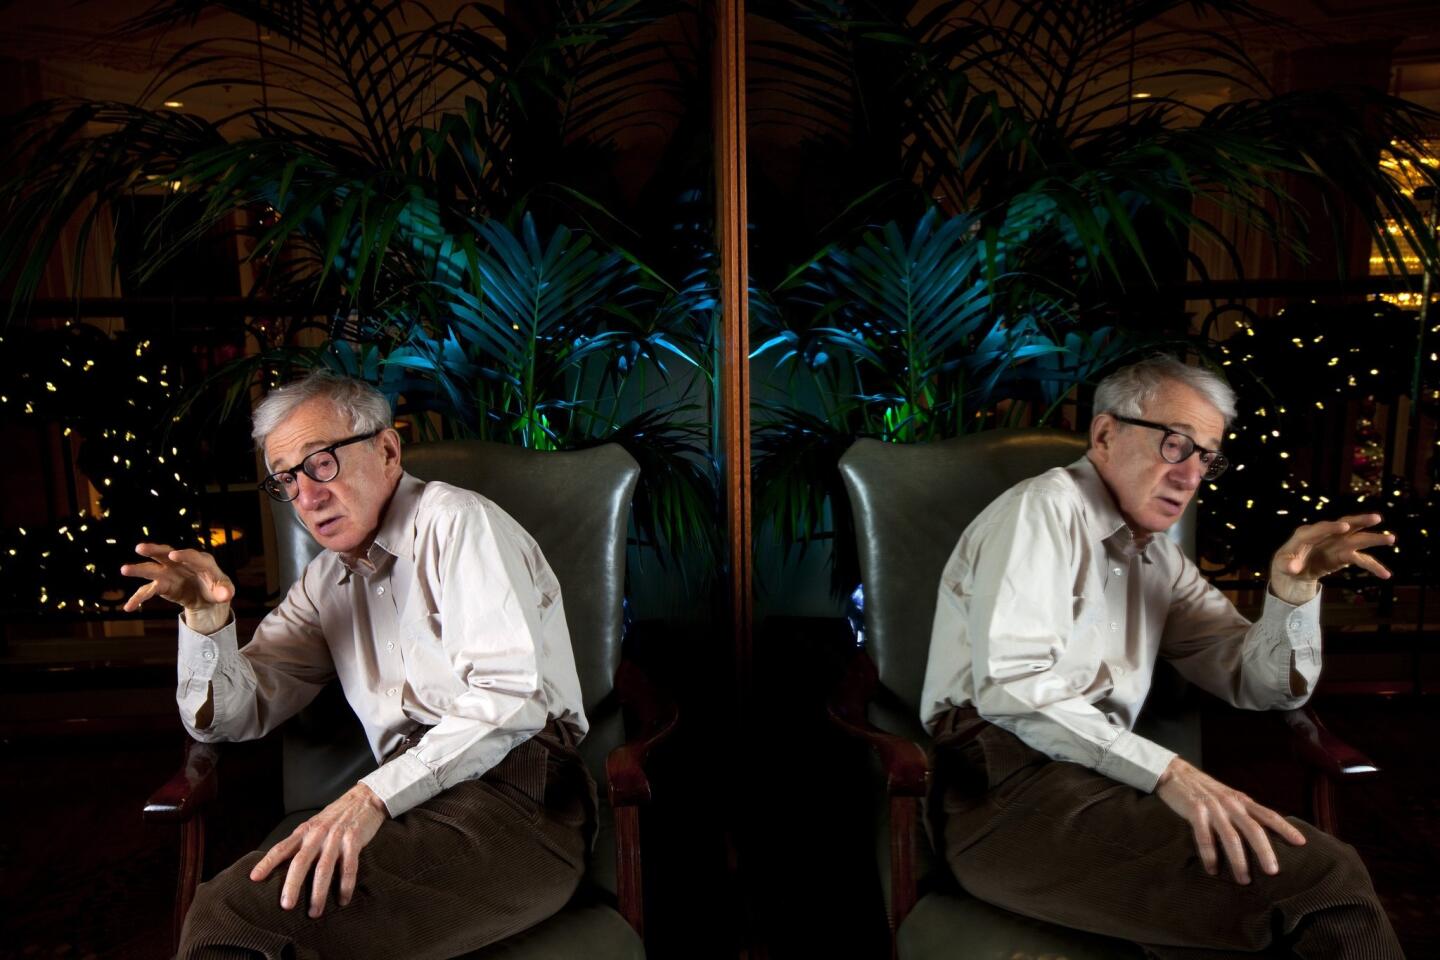 Woody Allen to defend himself after sexual abuse uproar